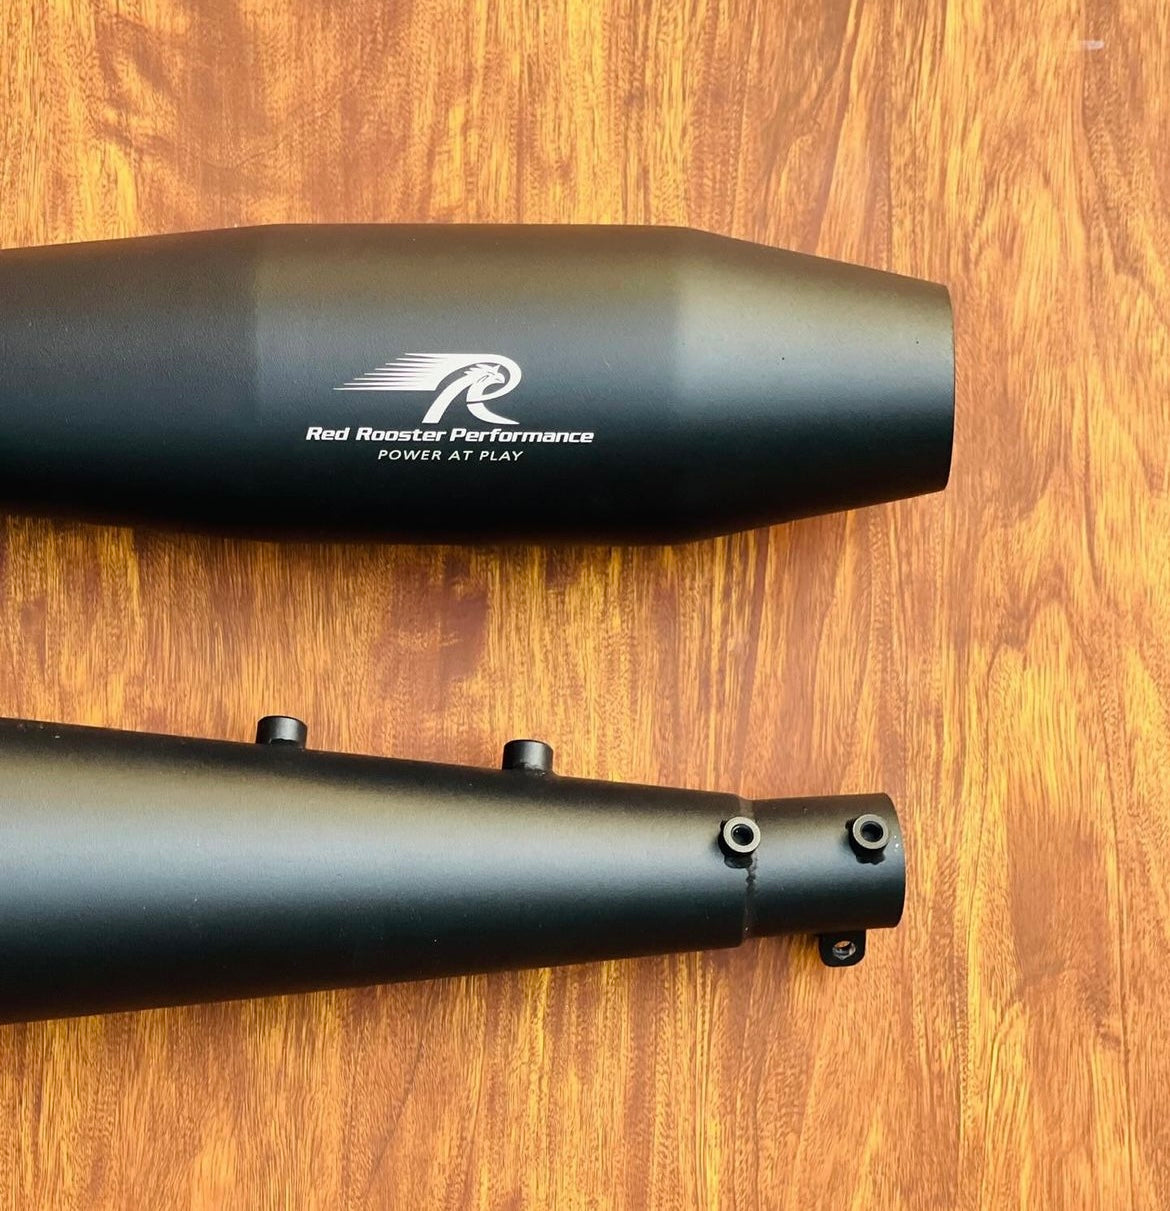 Red Rooster Exhaust Compatible for Interceptor 650 & Continental GT 650